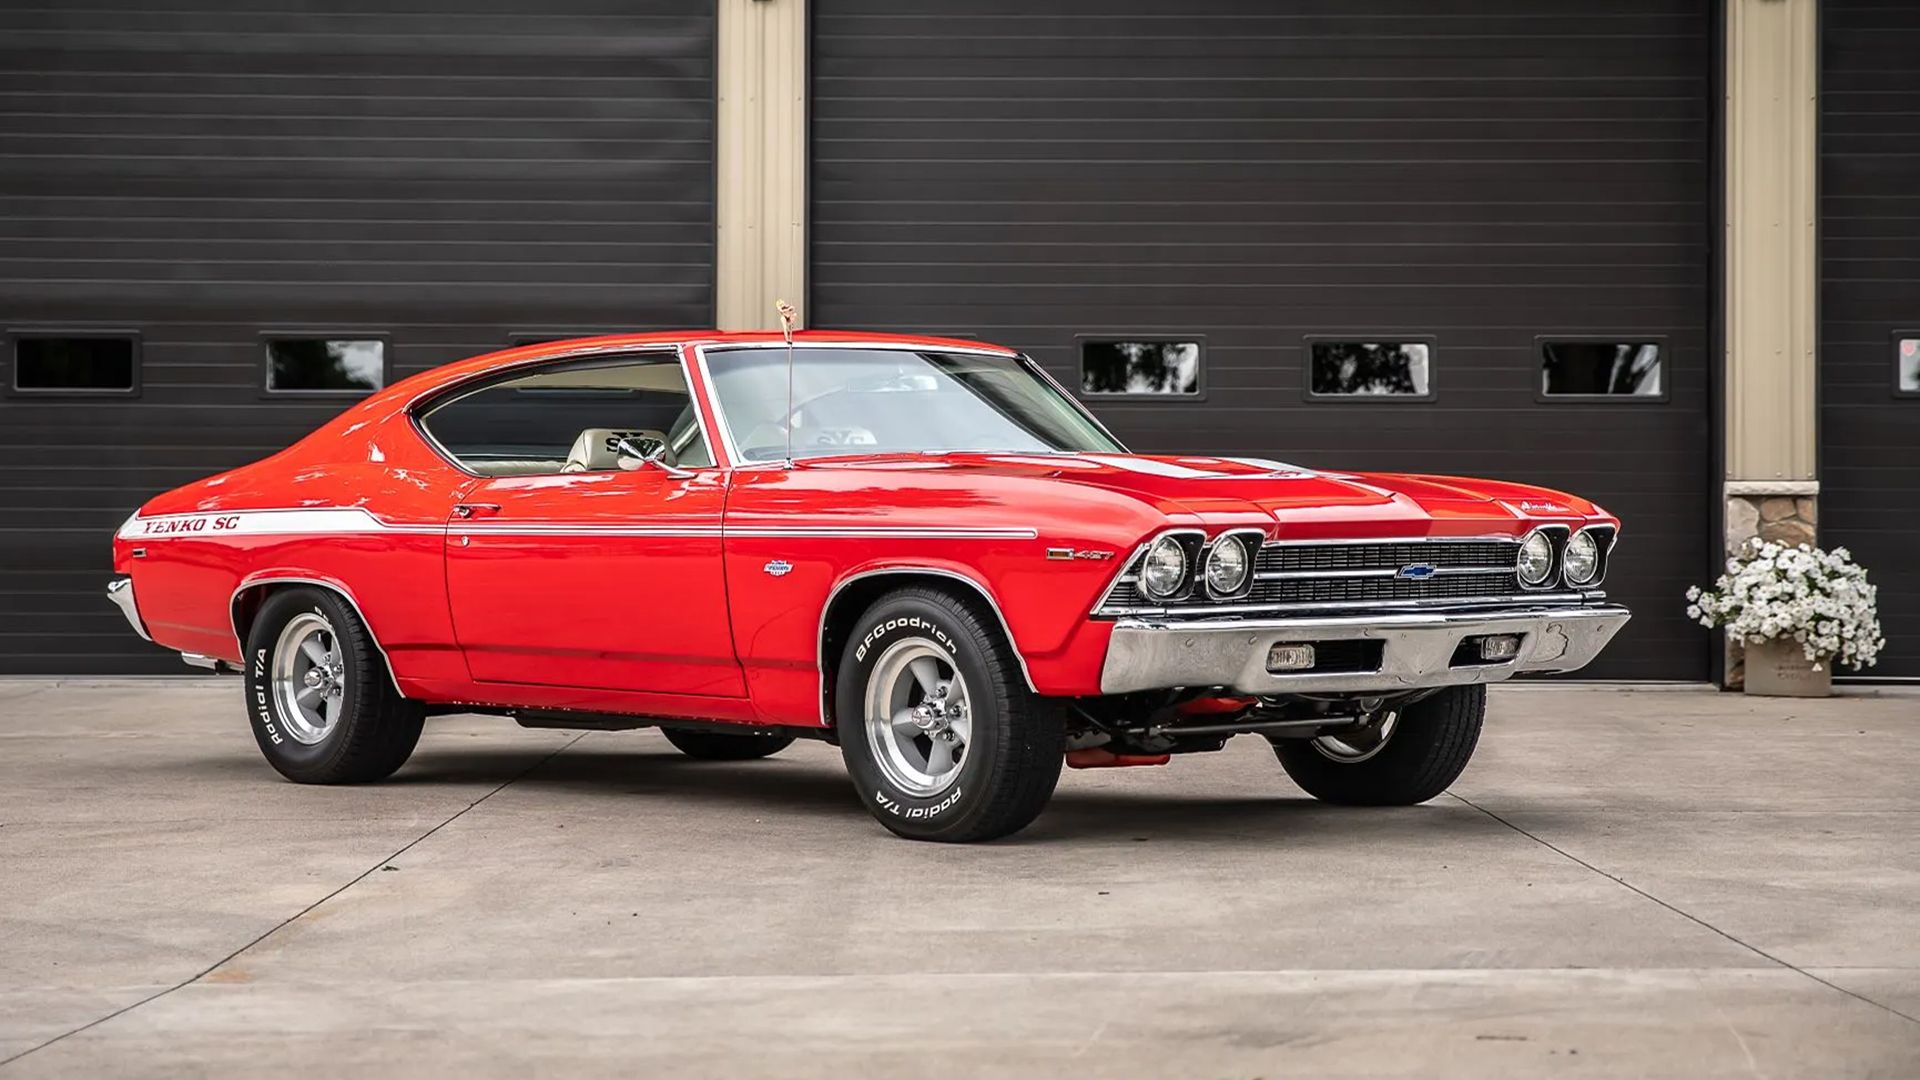 A Red 1969 Chevrolet Chevelle